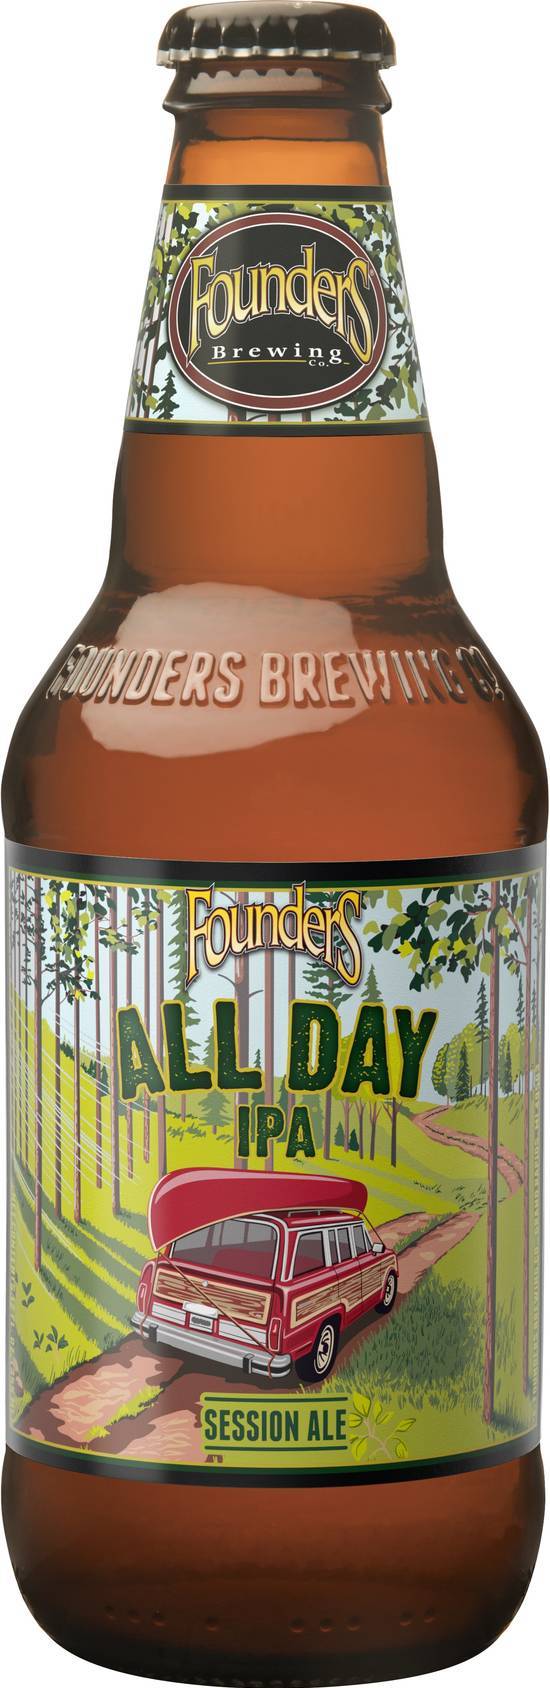 Founders All Day Ipa, Session Ipa Beer (6x 12oz bottles)